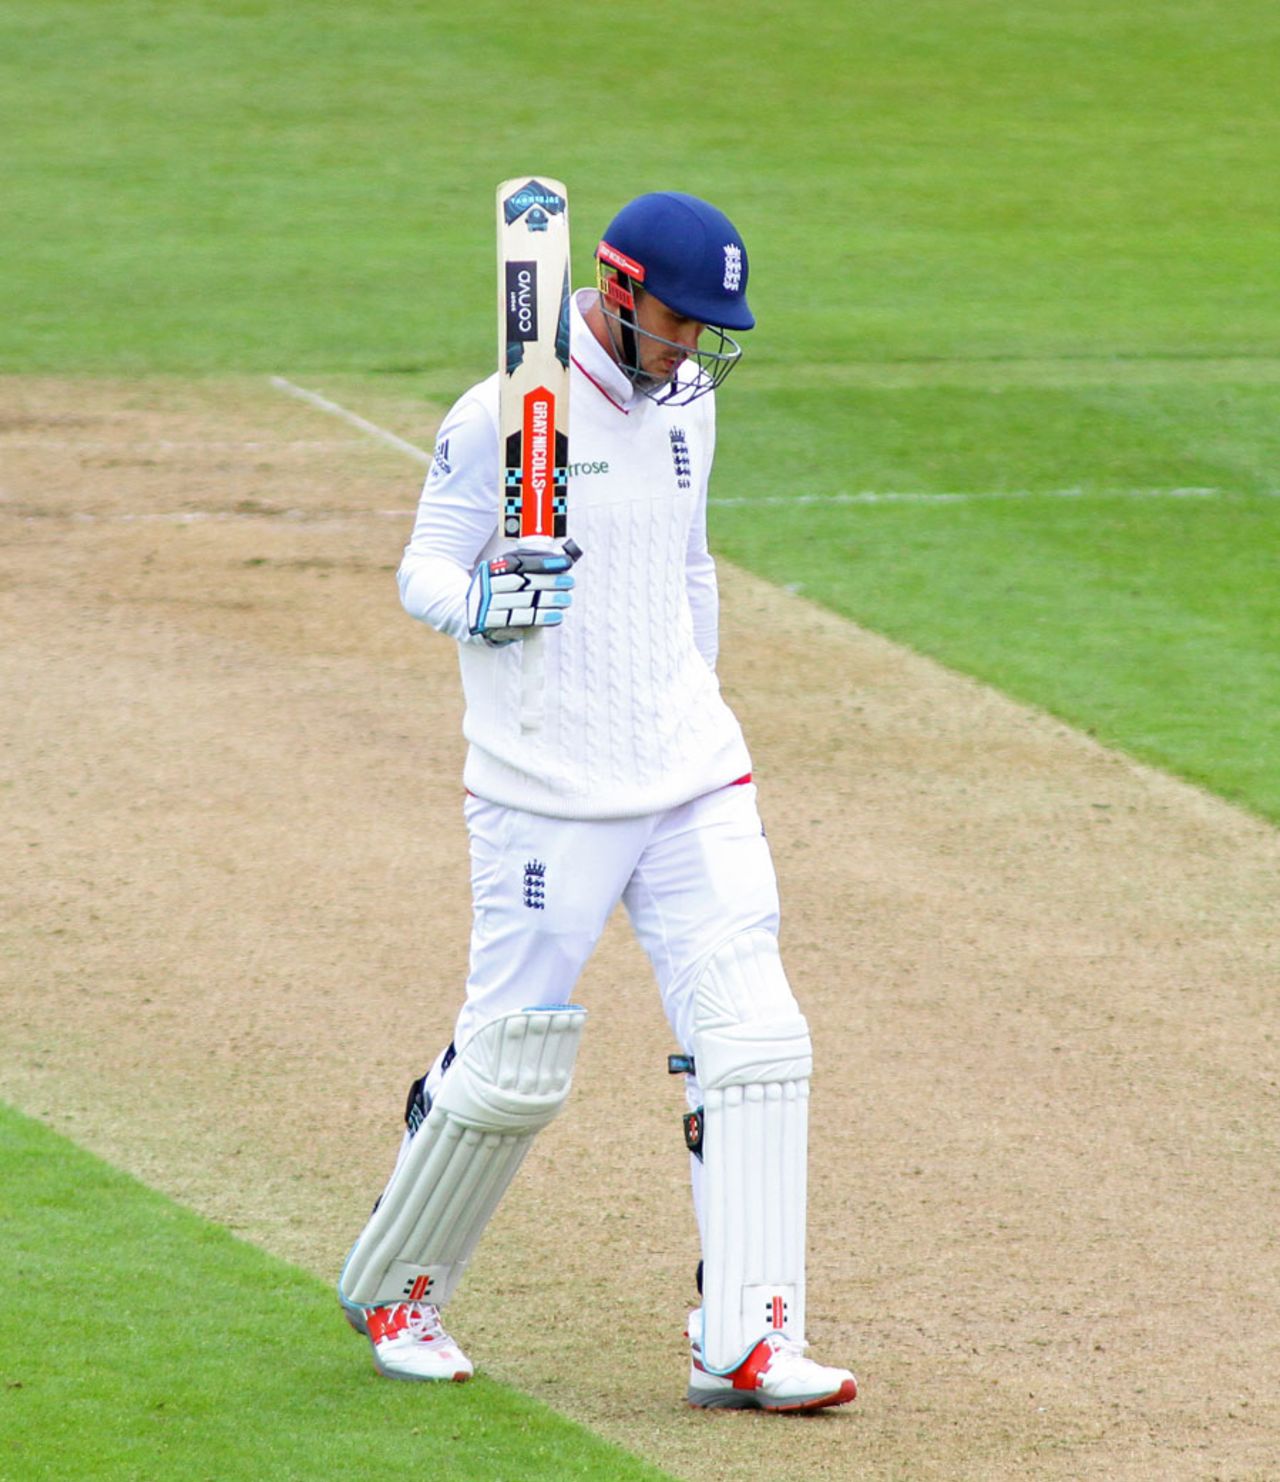 Alex Hales holds up his bat on reaching fifty, England v Sri Lanka, 2nd Test, Chester-le-Street, 1st day, May 27, 2016